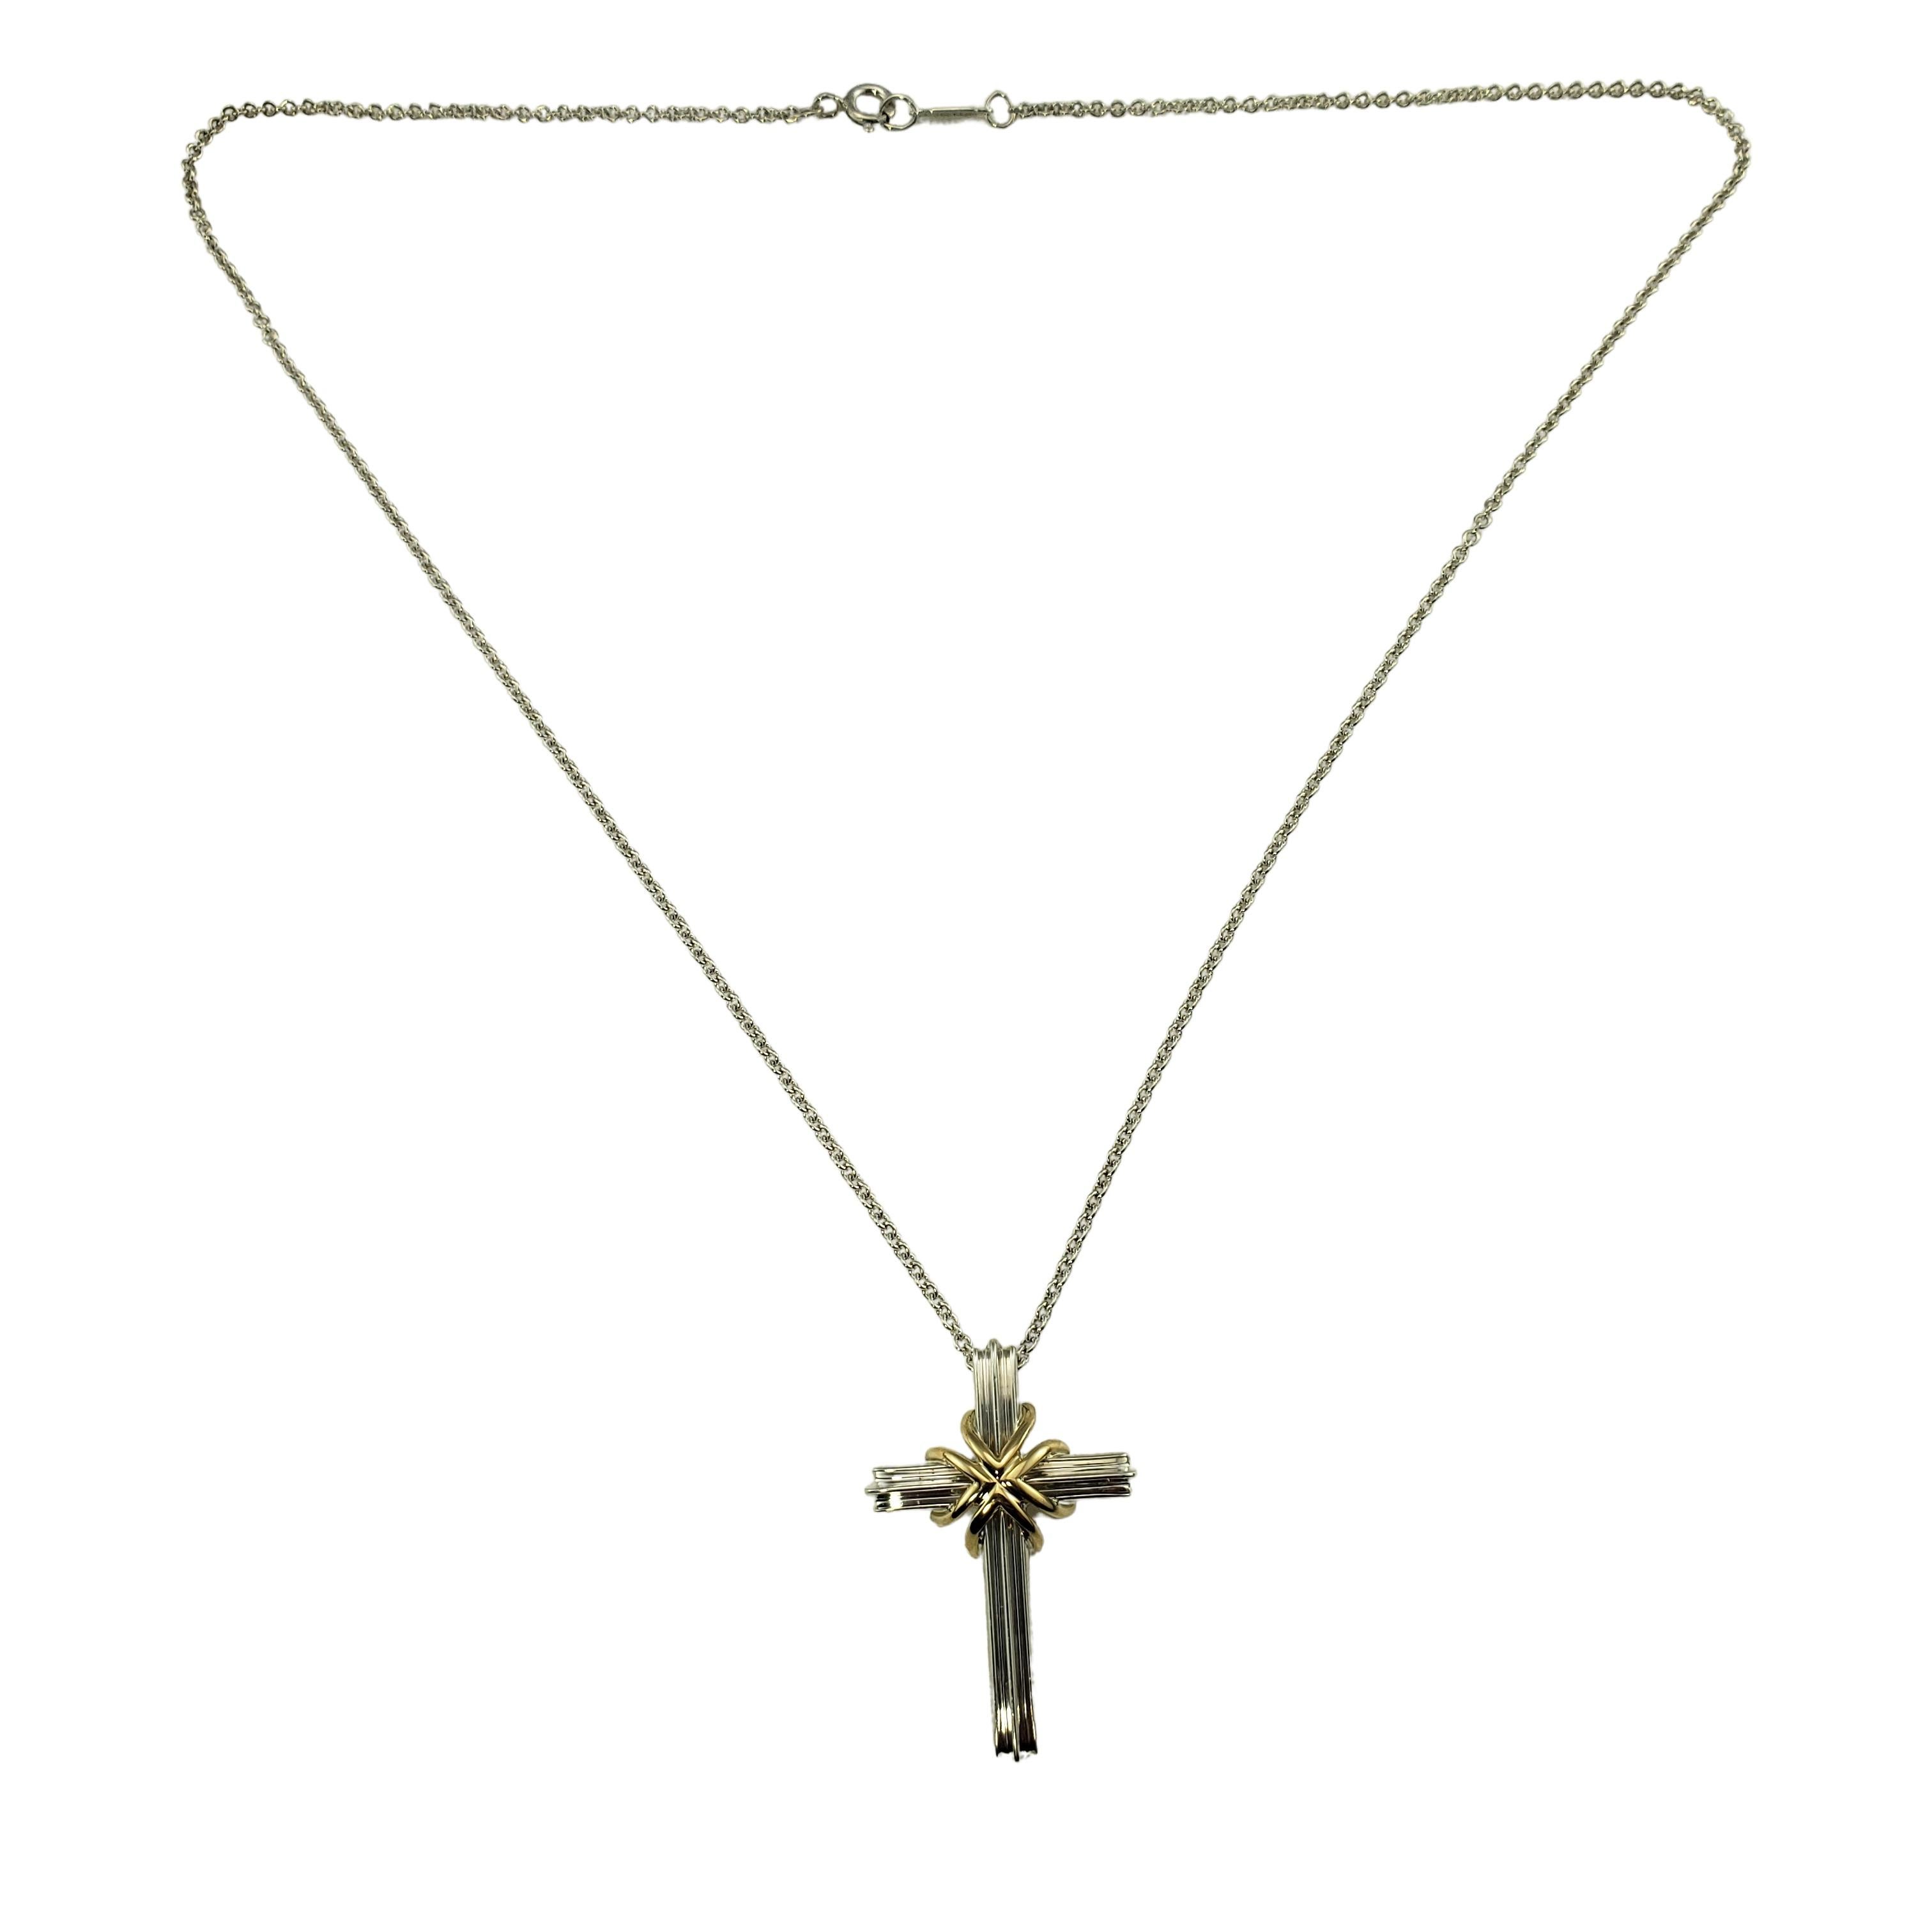 Women's or Men's Tiffany & Co. Sterling Silver and 18 Karat Yellow Gold Cross Pendant Necklace